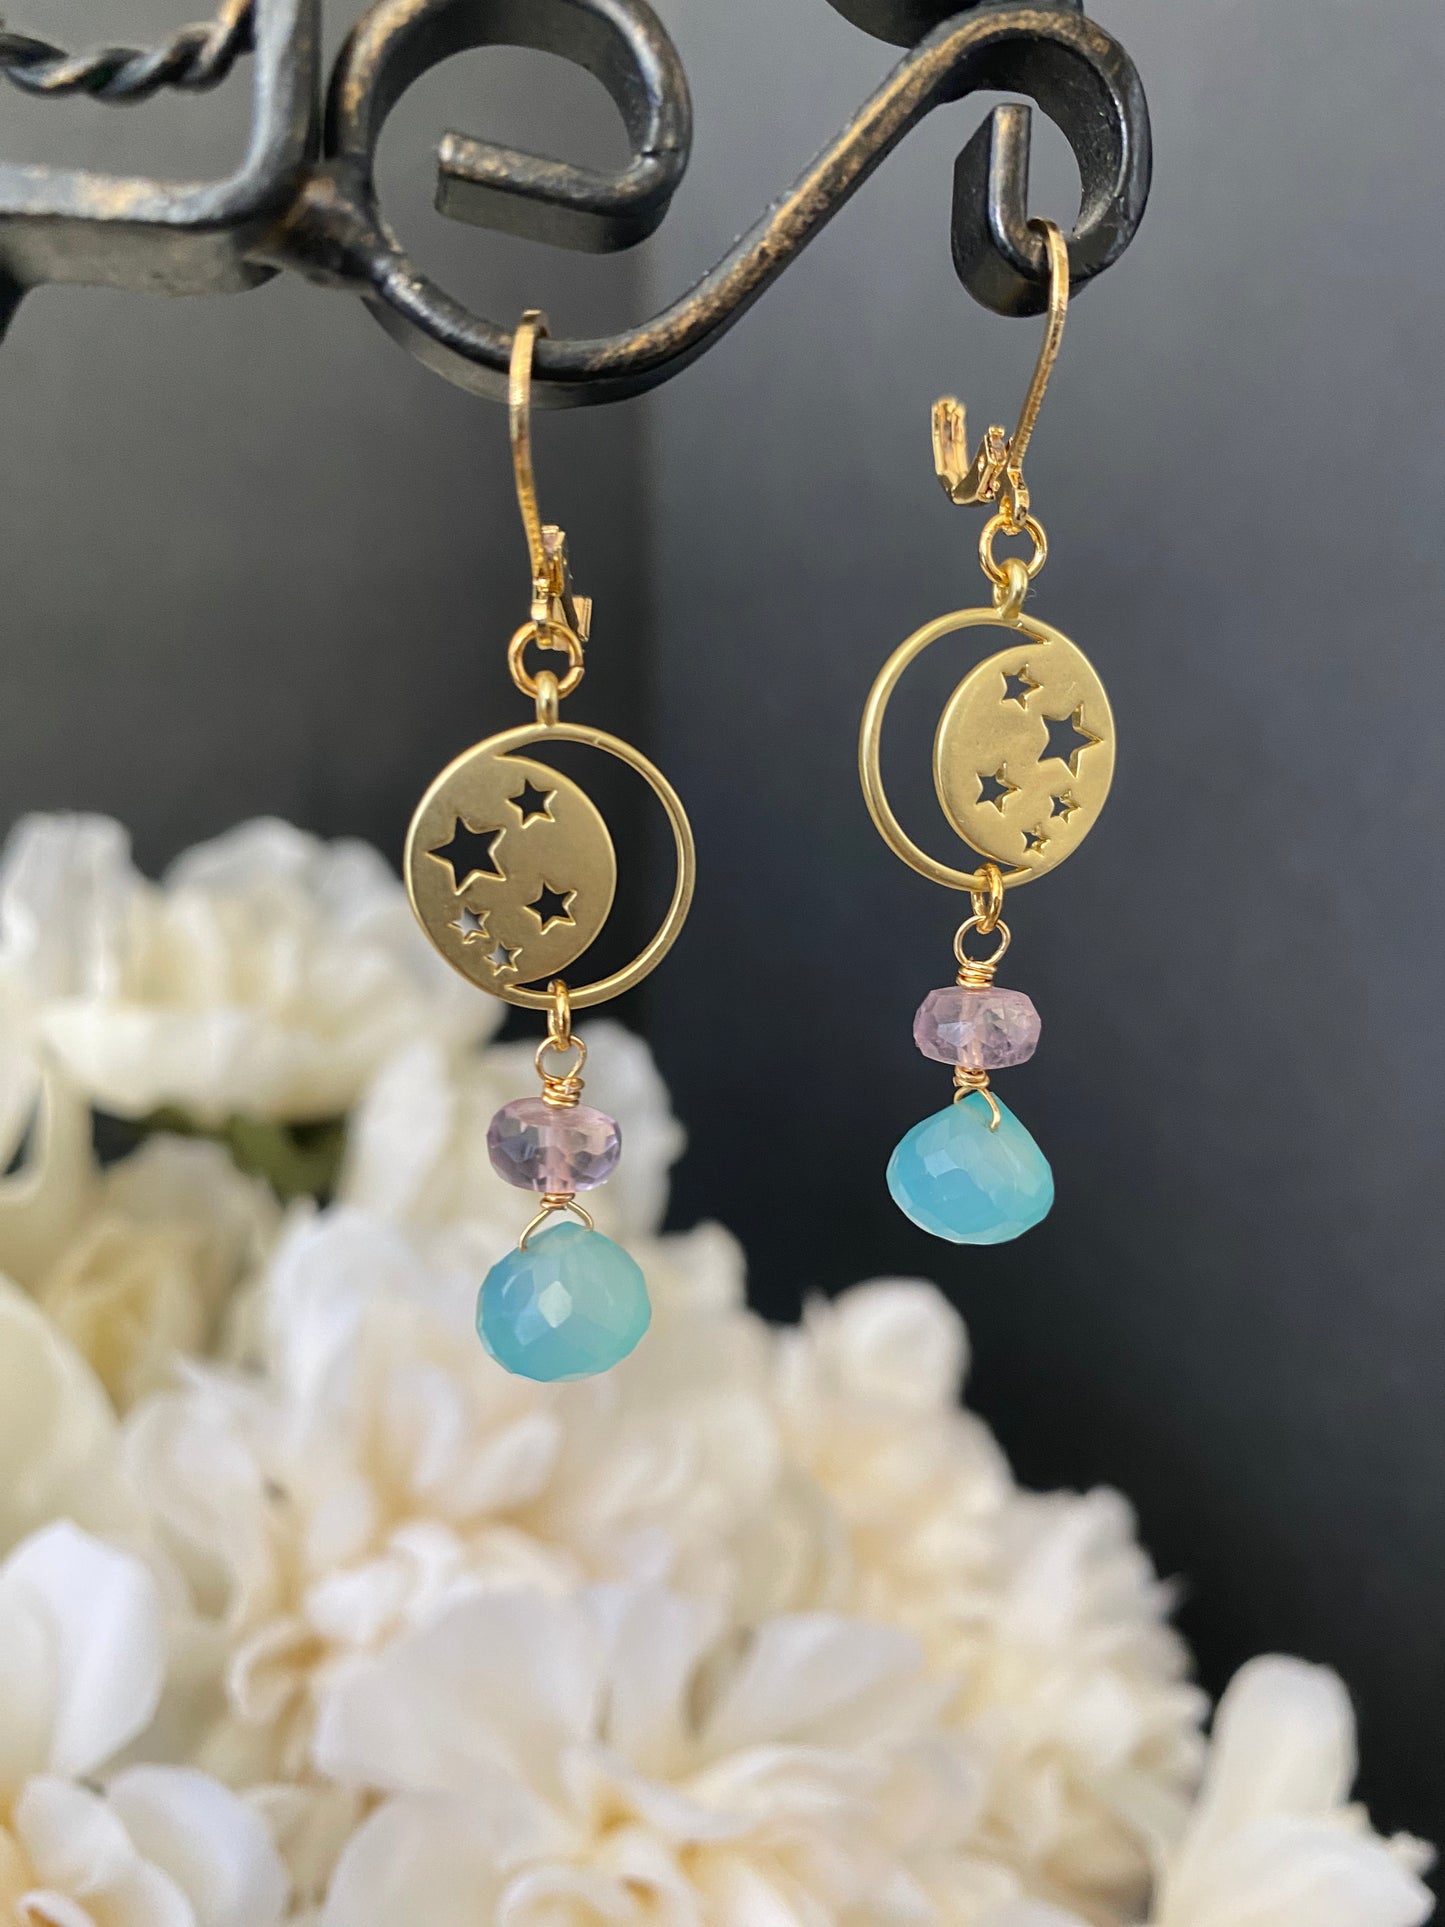 Blue Chalcedony, faceted amethyst, gold metal earrings - Andria Bieber Designs 